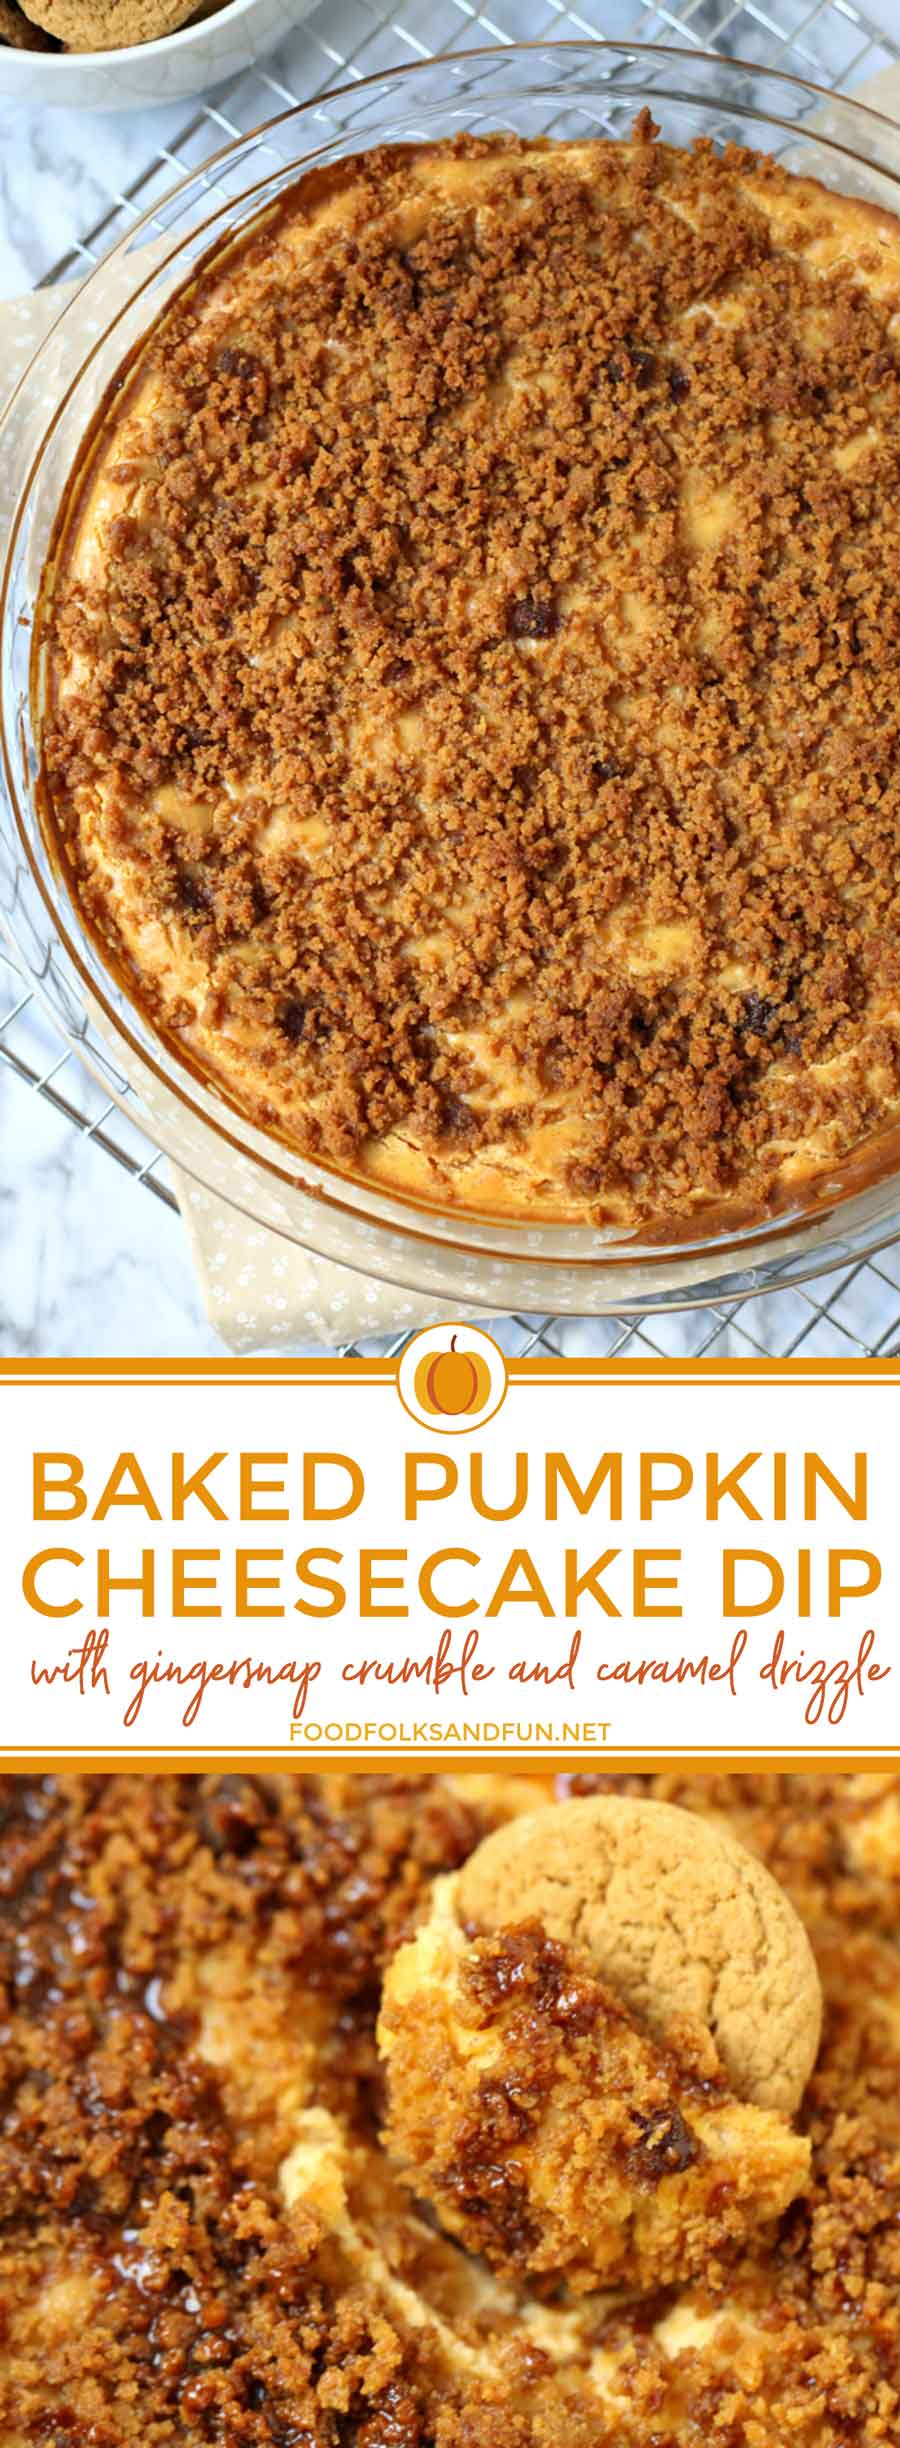 This is your new favorite fall dessert: Baked Pumpkin Cheesecake Dip with a gingersnap crumble and caramel drizzle! PLUS a recipe video so you can see just how easy this Pumpkin Cheesecake Dip is to make!  via @foodfolksandfun